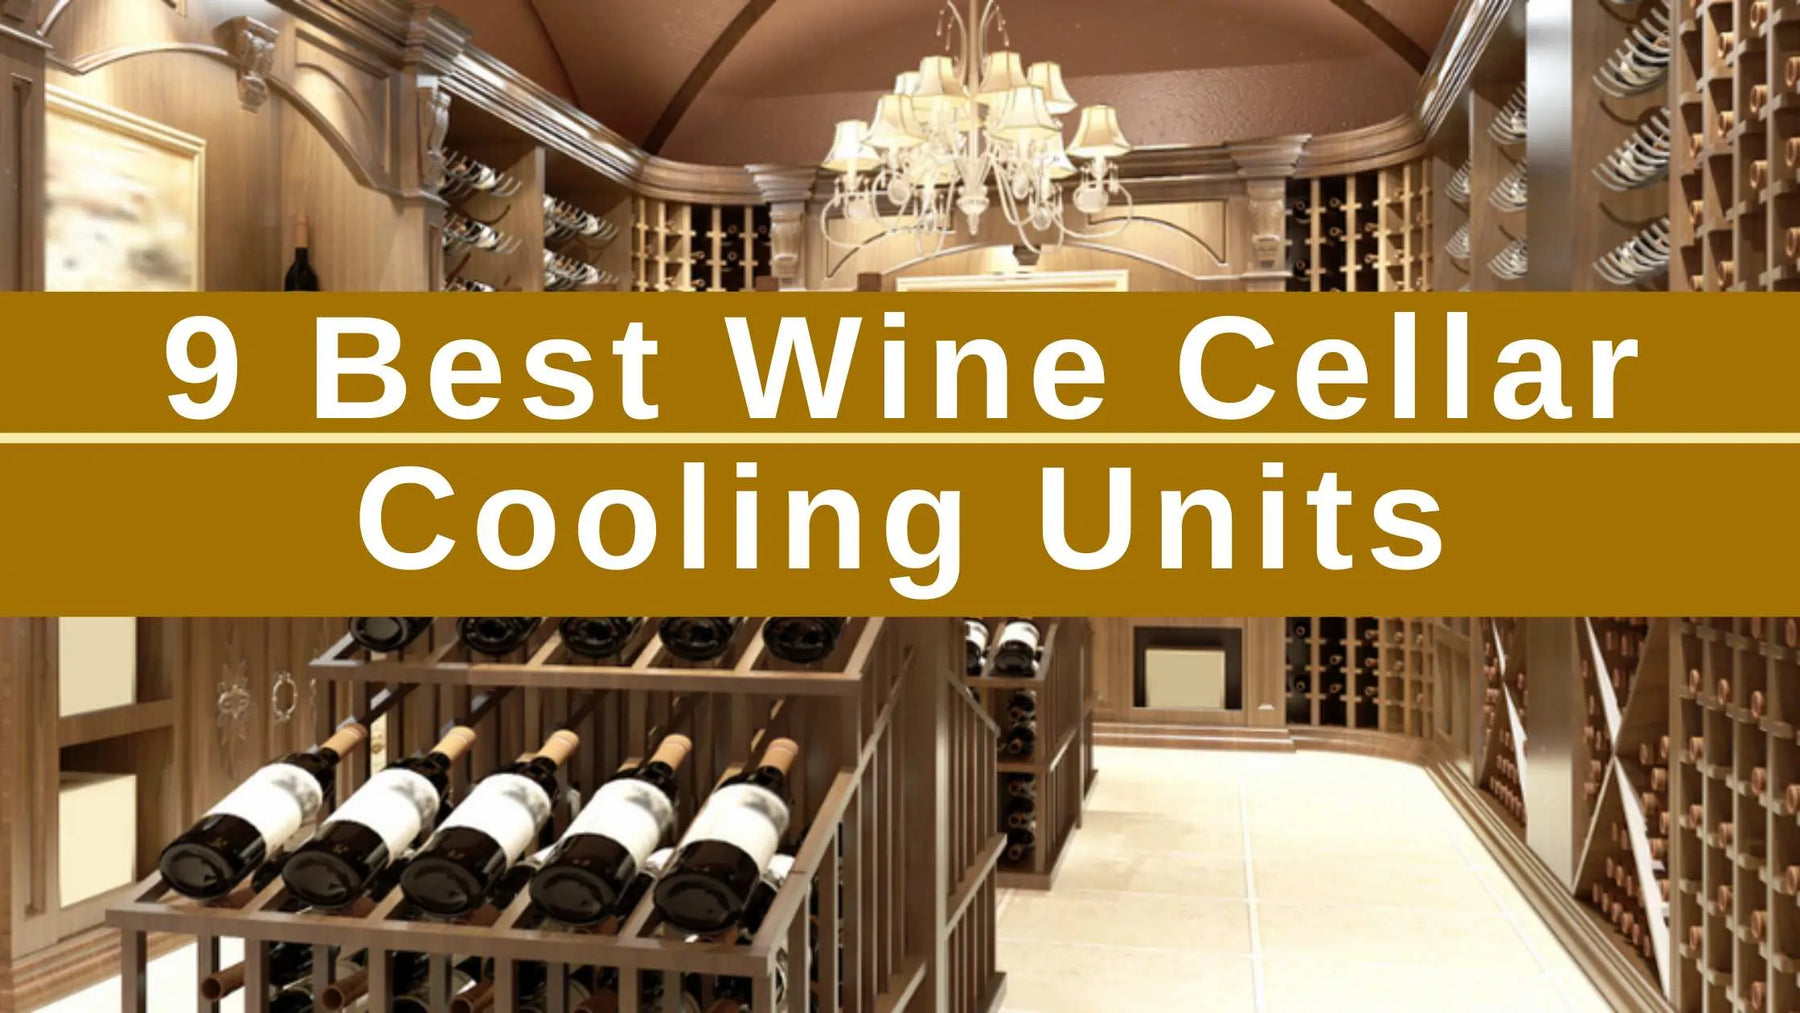 9 Best Wine Cellar Cooling Units | Wine Coolers Empire - Trusted Dealer